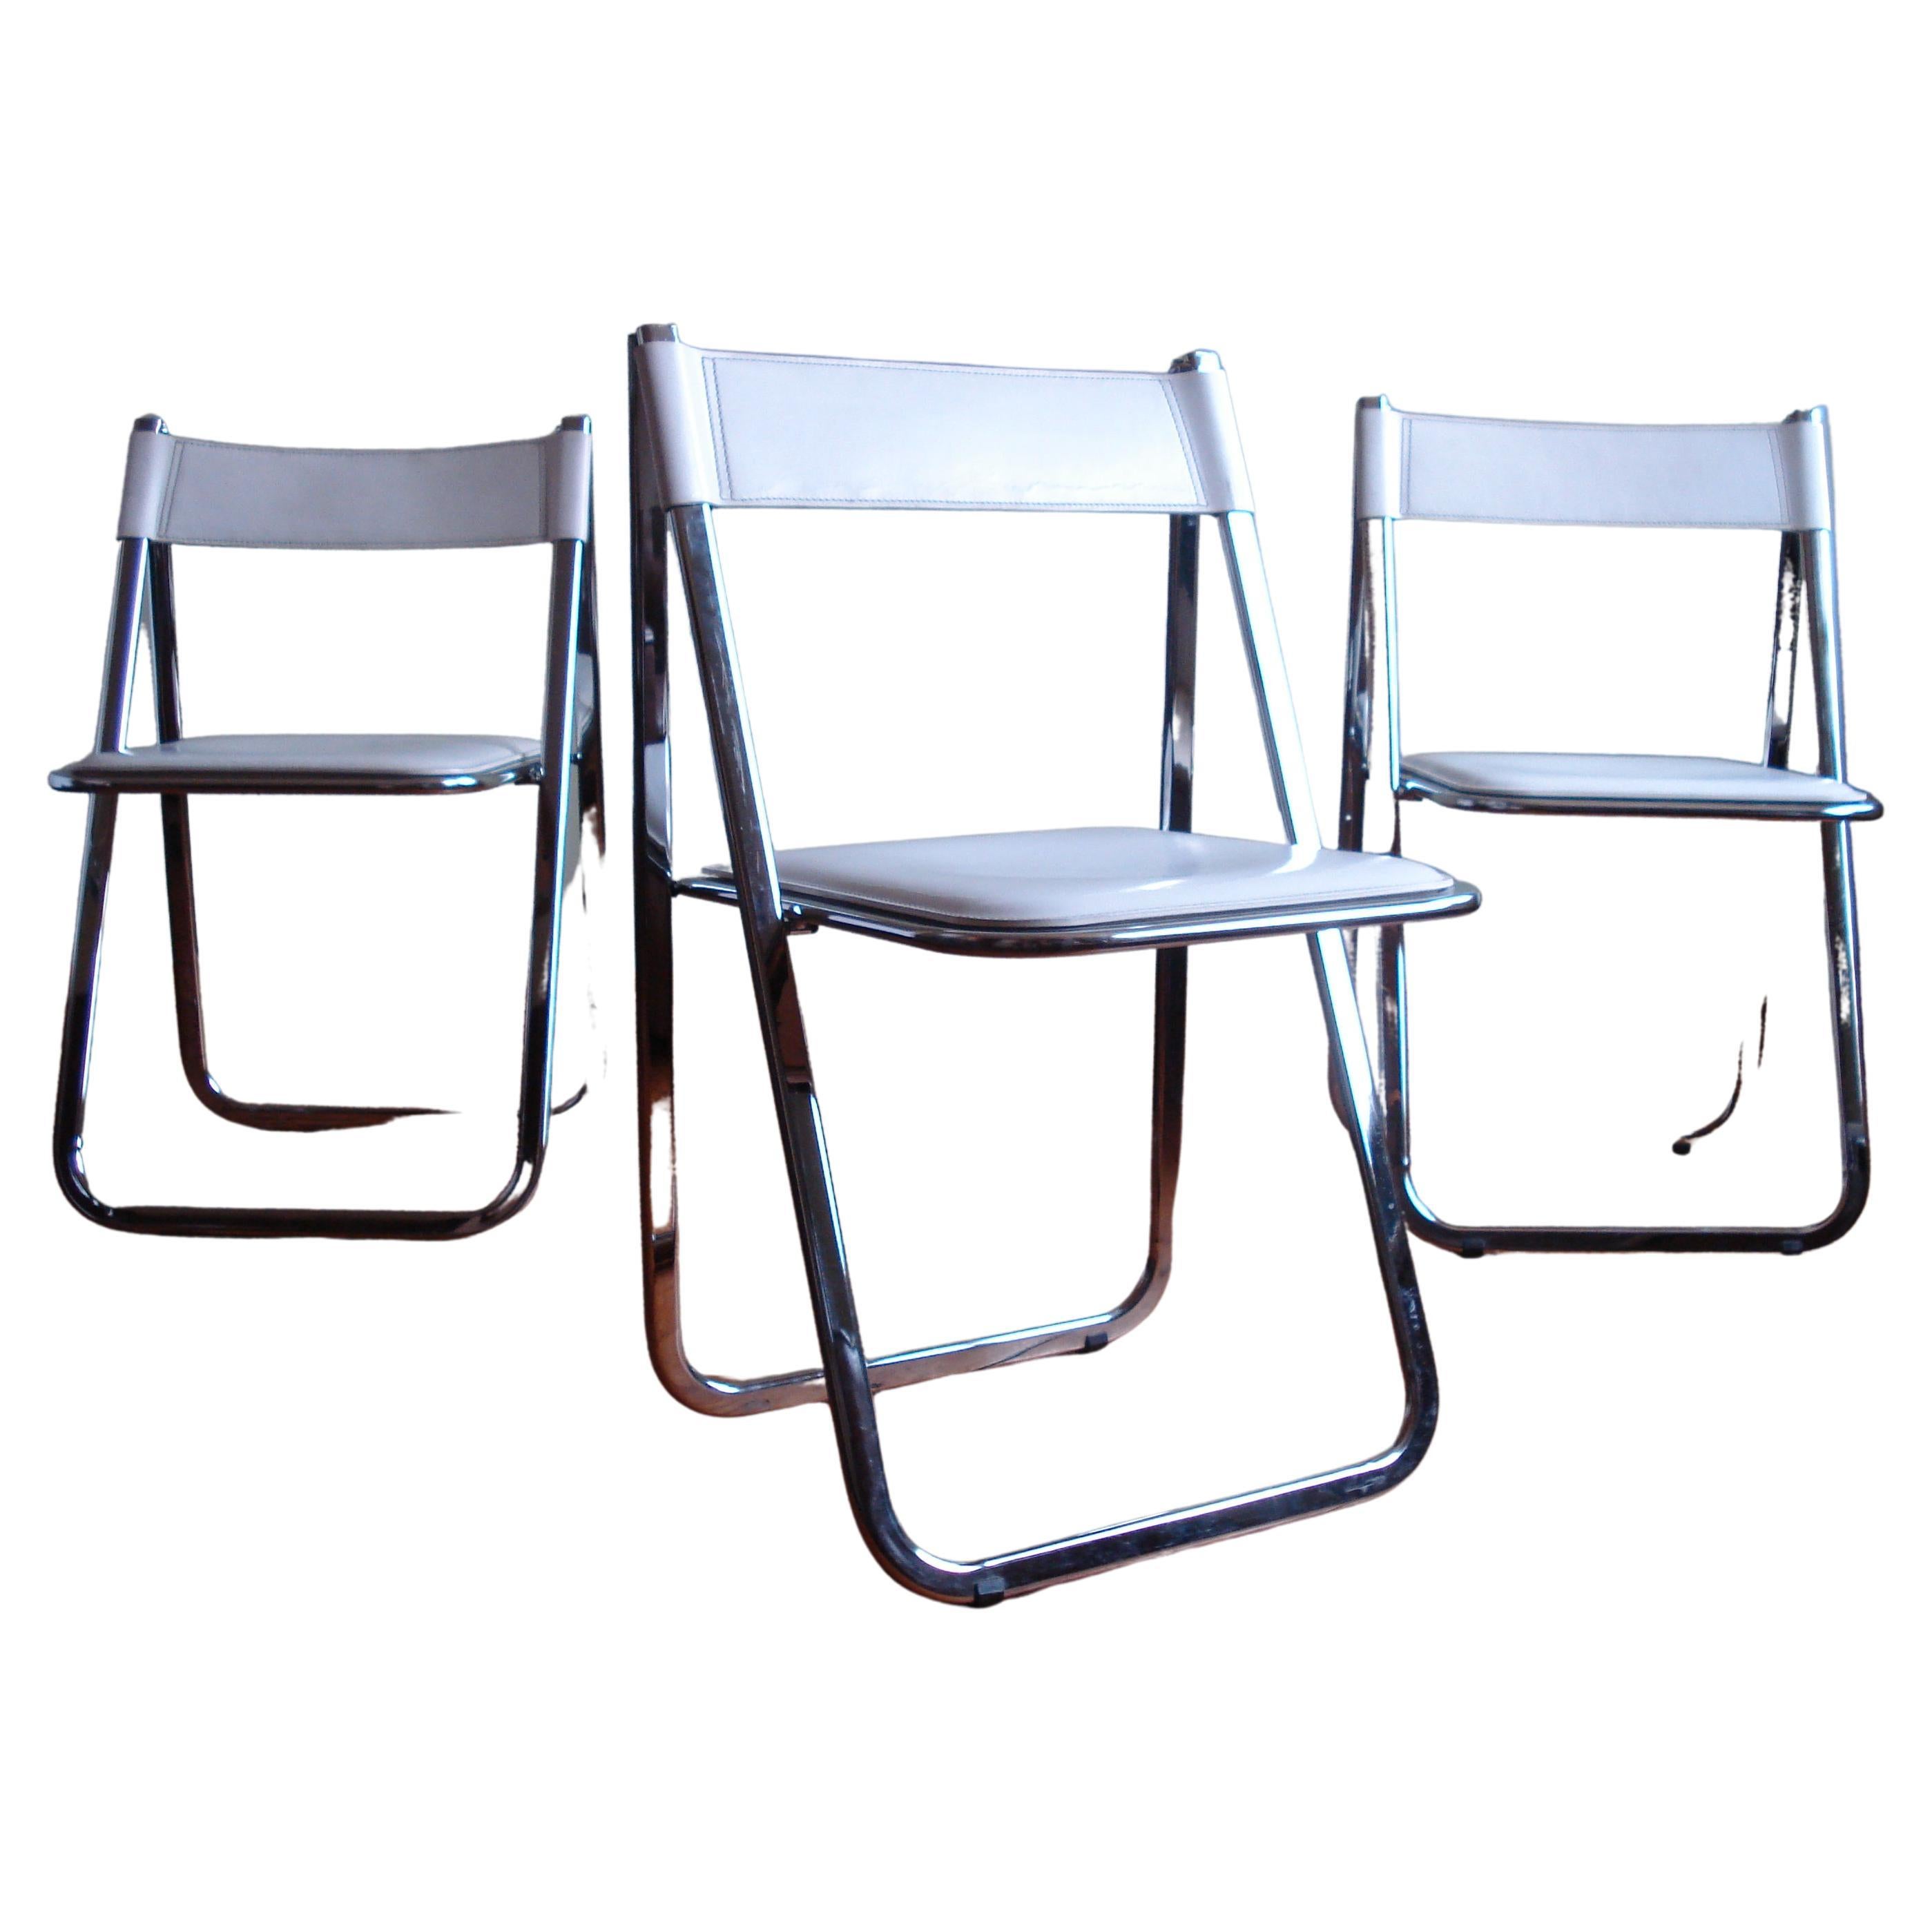 Italian Leather Folding Chairs "Tamara" by Arrben, 1970s For Sale